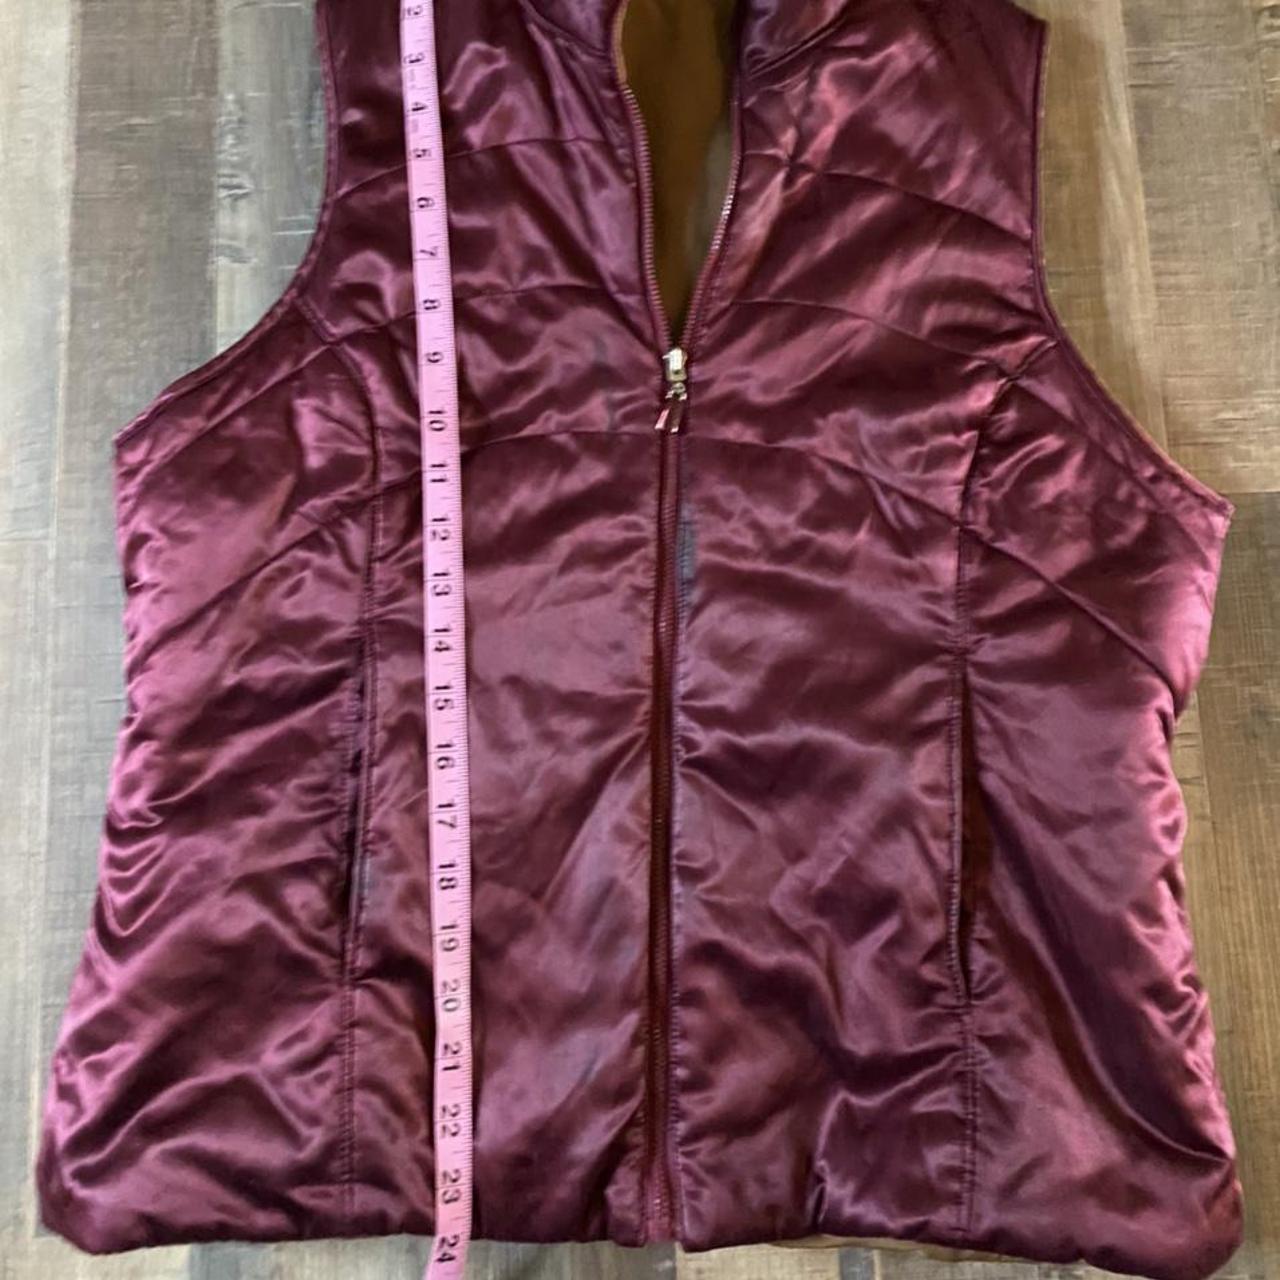 Product Image 3 - Burgundy puffer vest!❄️ 
Pit to